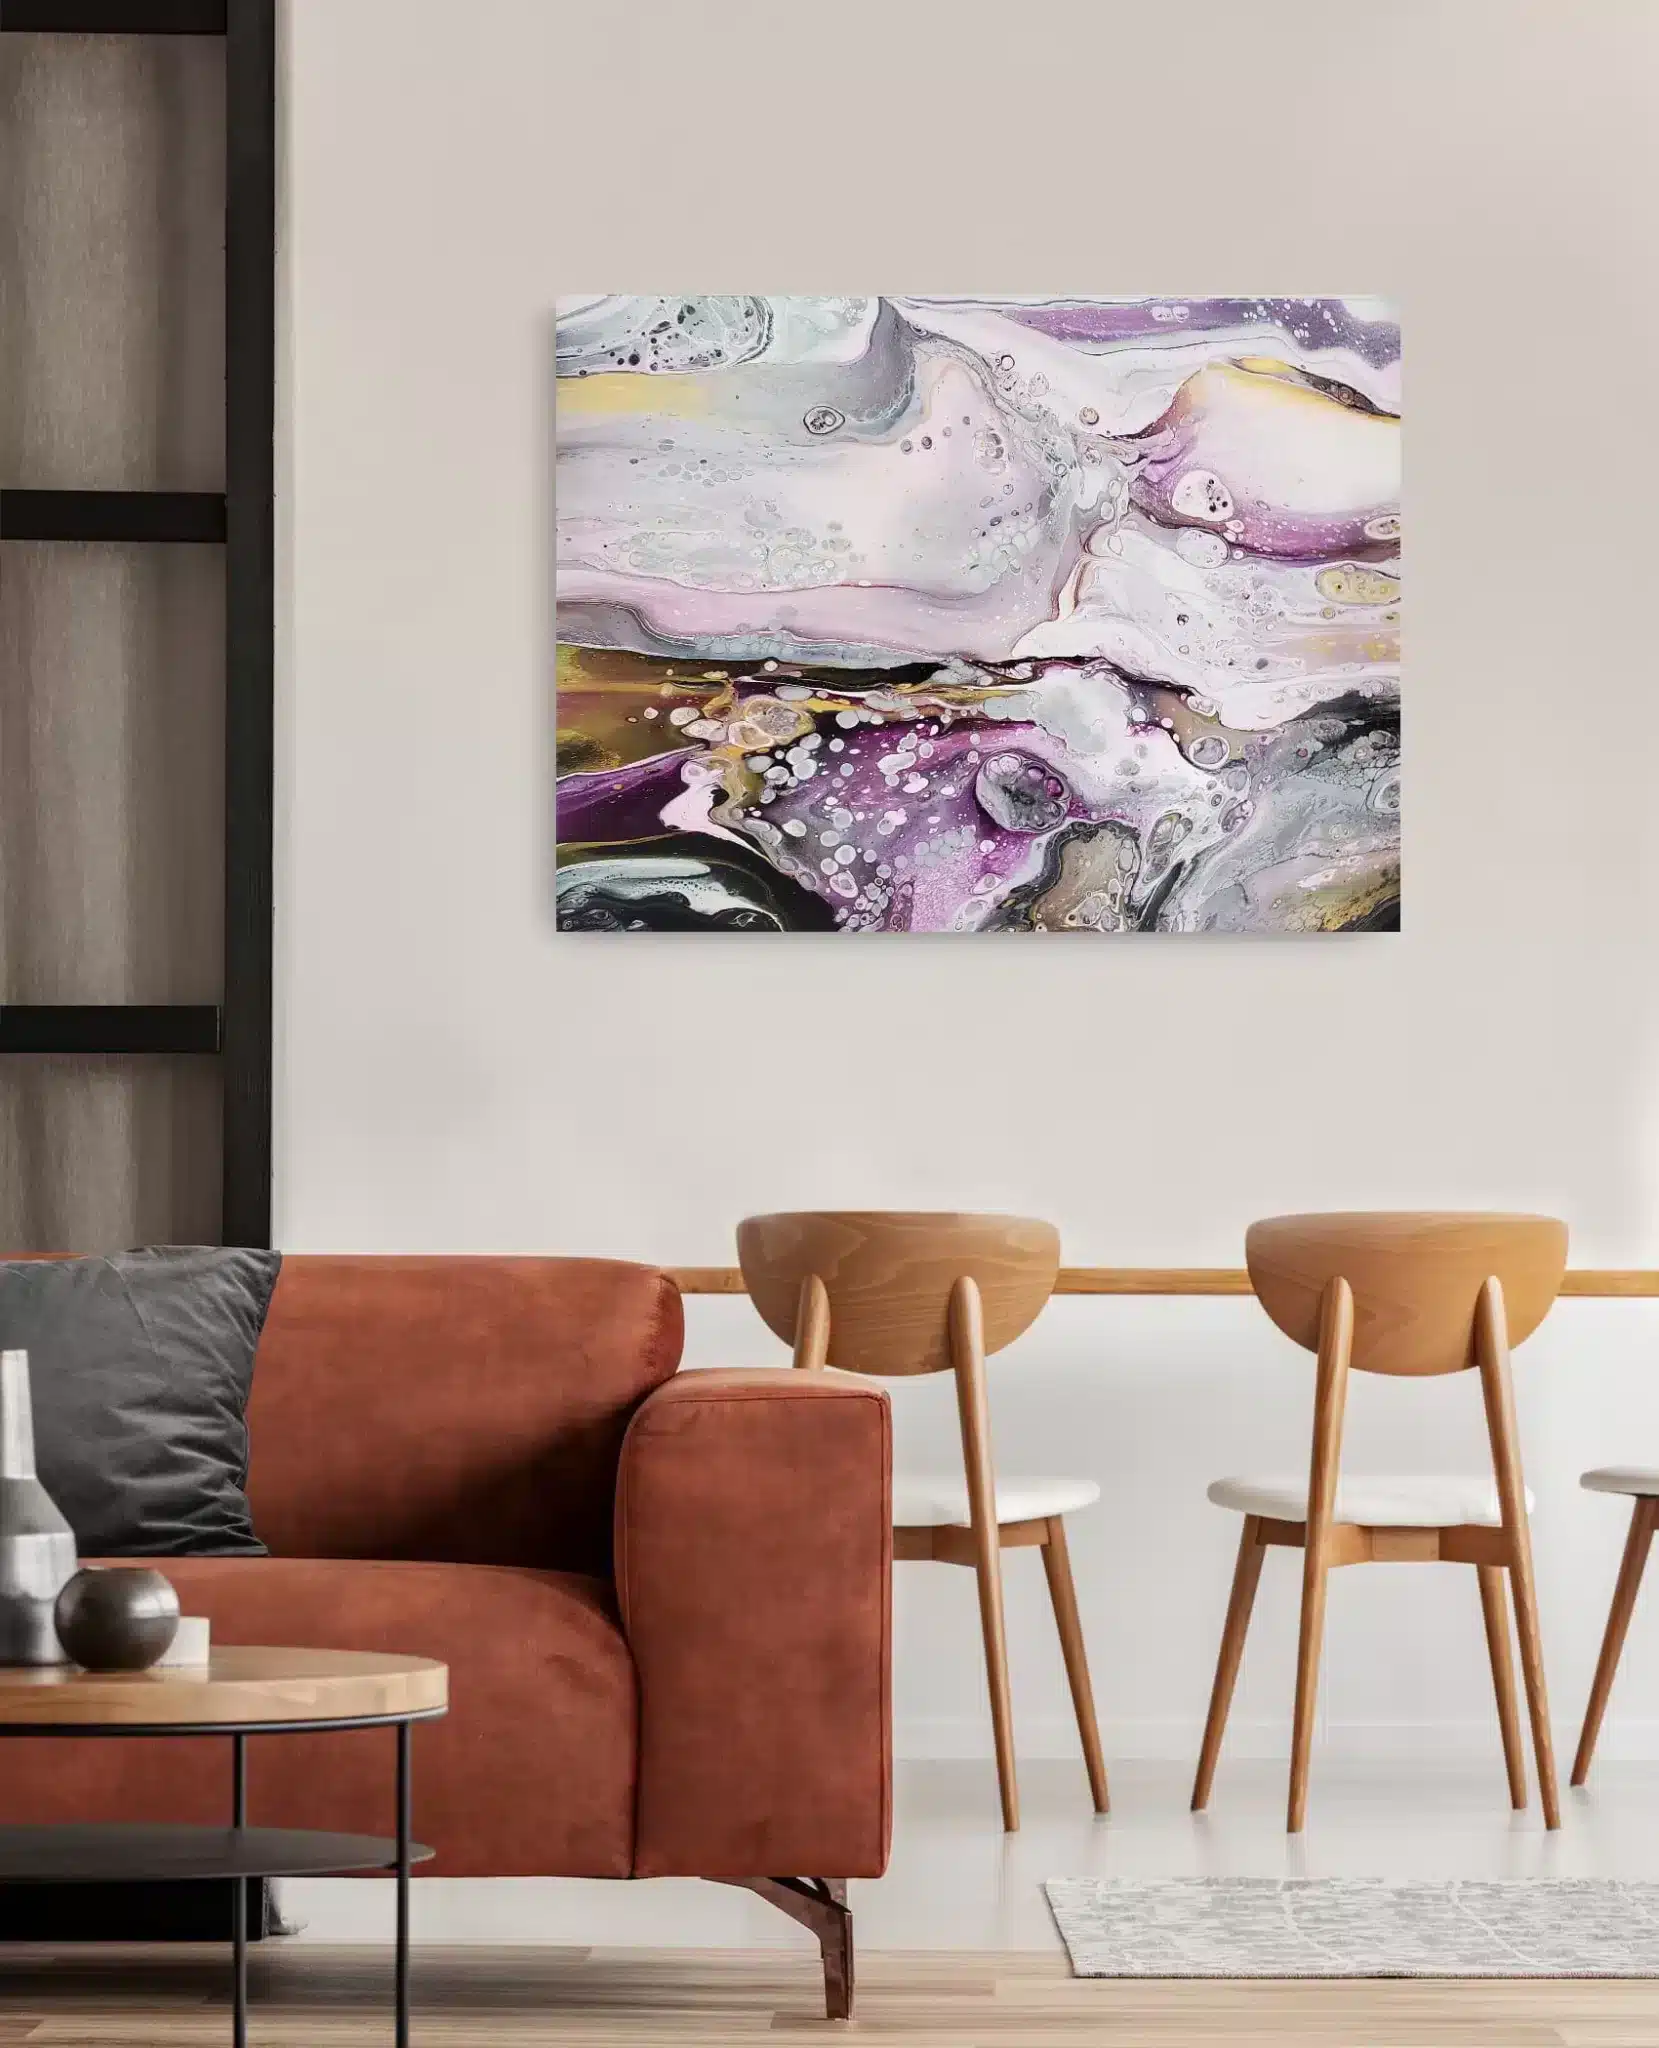 Why you should add artwork in your home